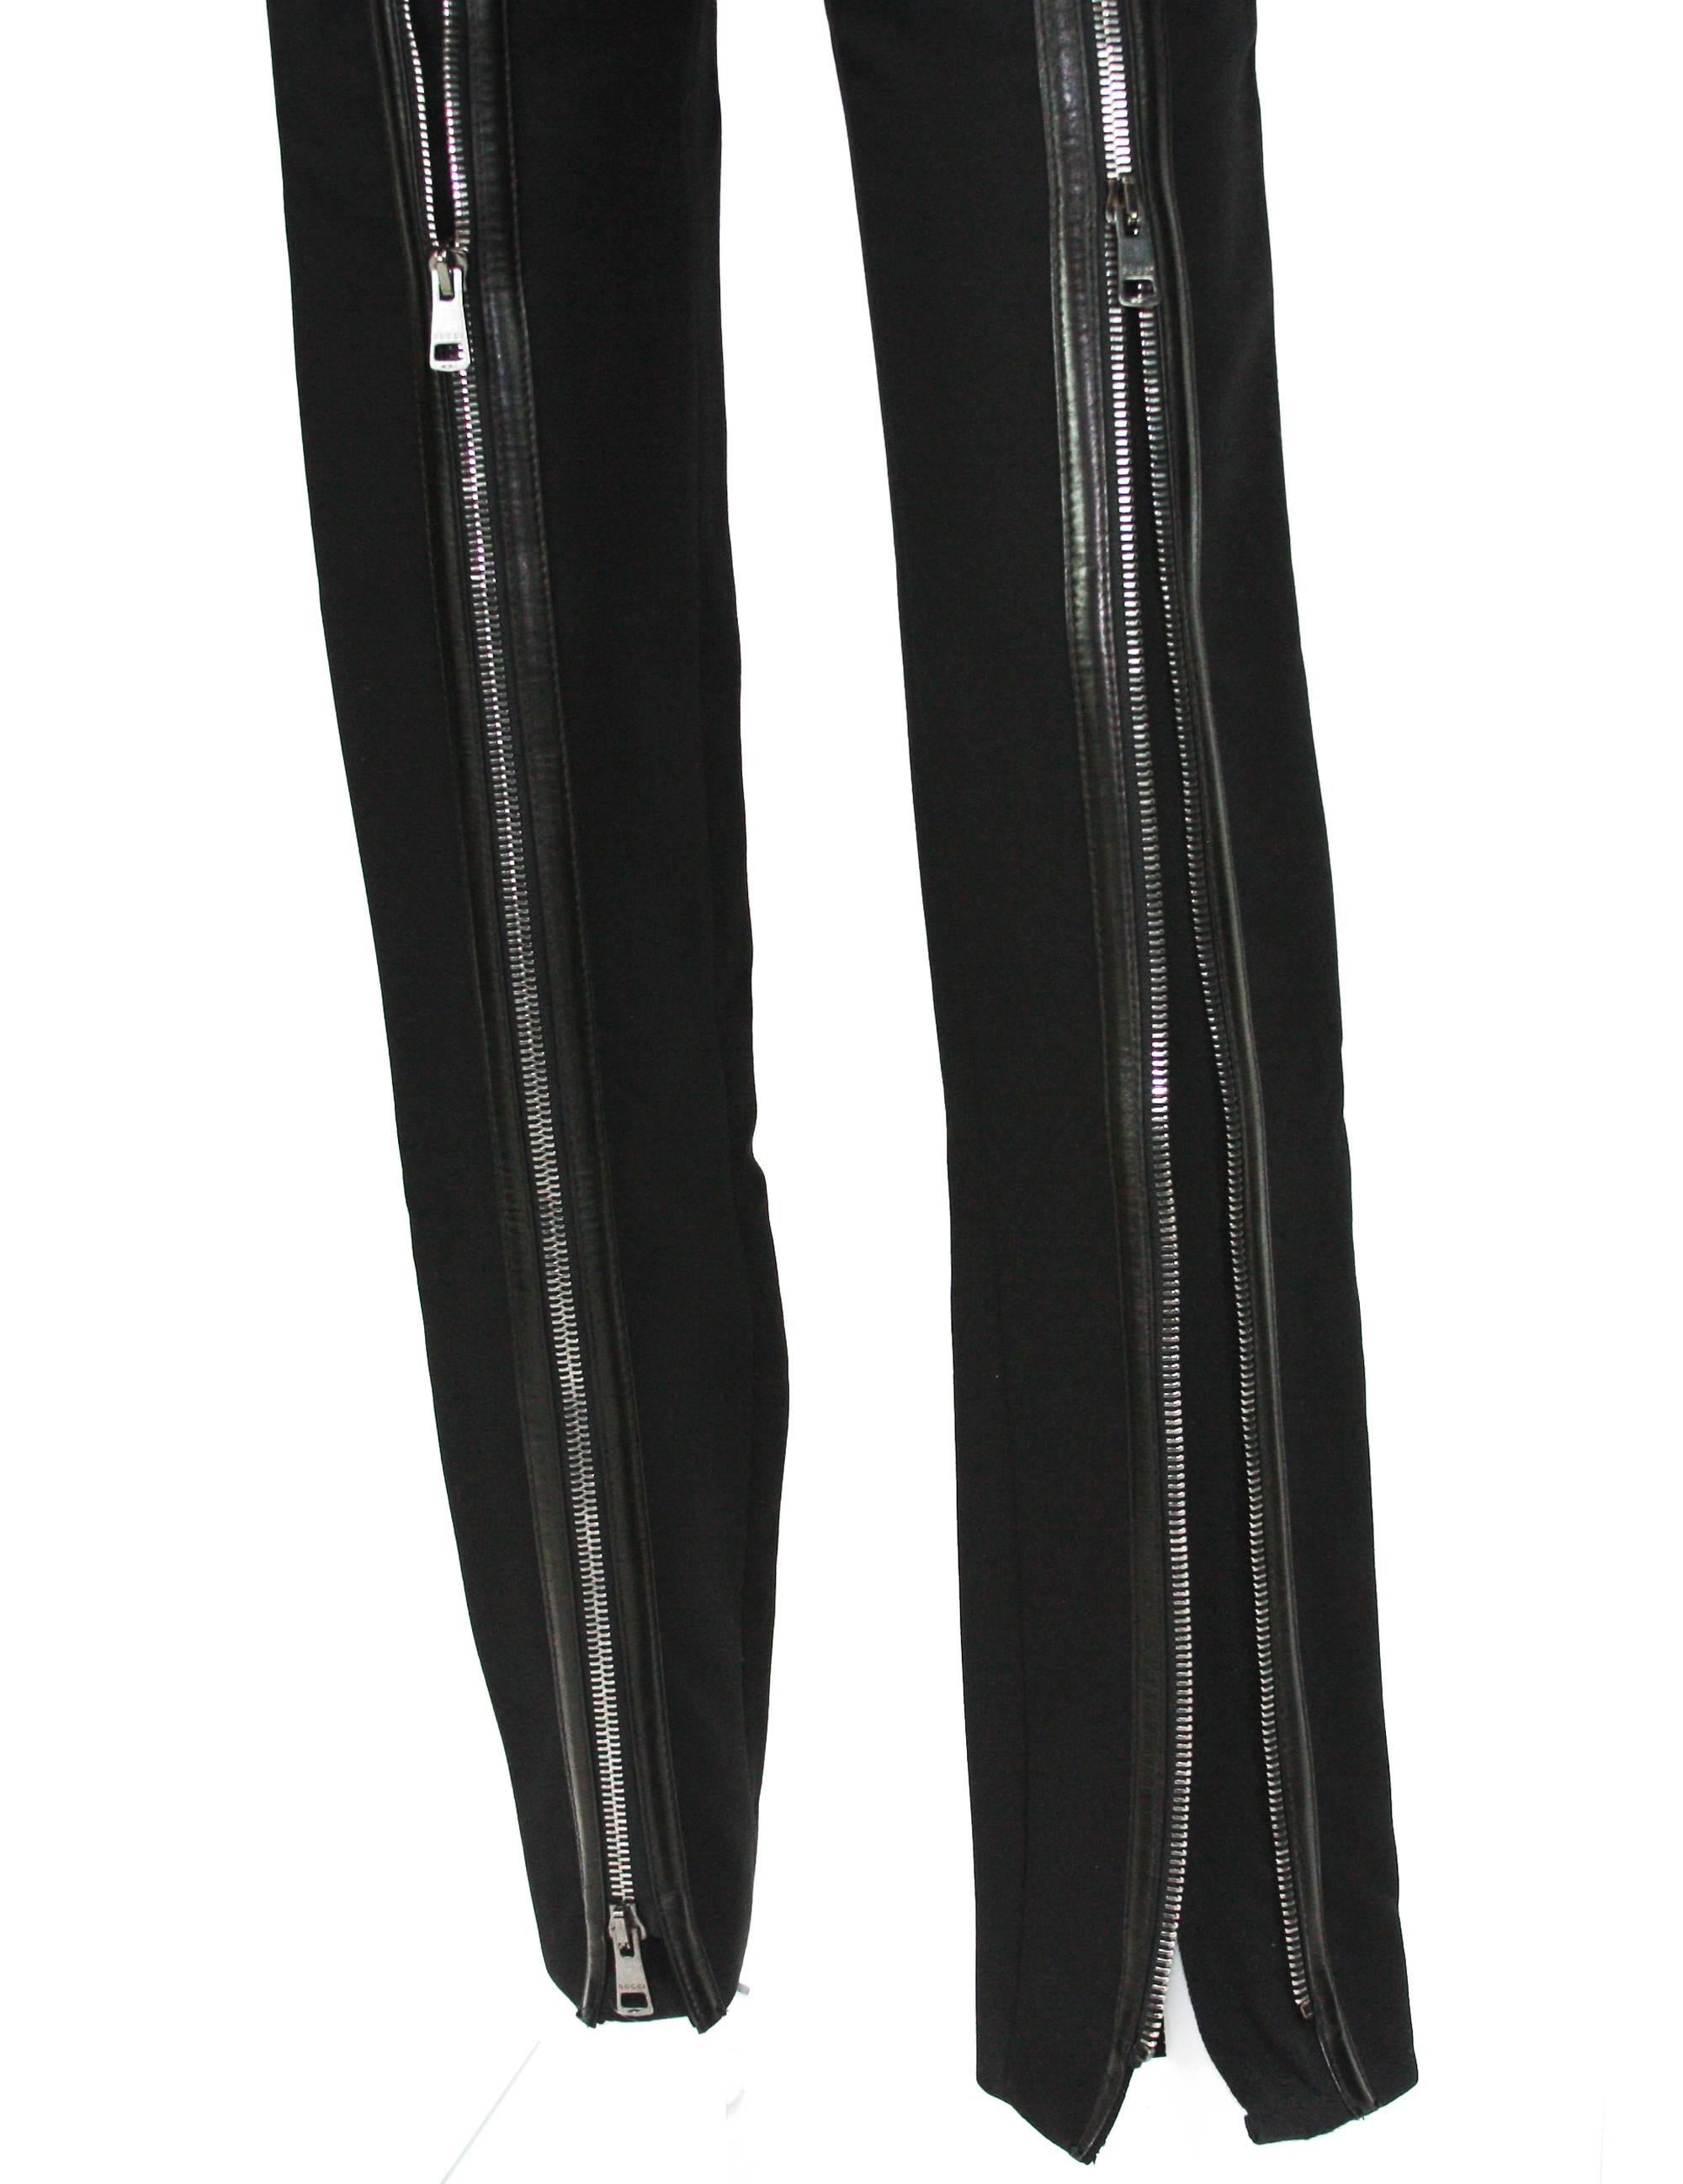 Tom Ford for Gucci F/W 2001 Zipper Leather Pants 1